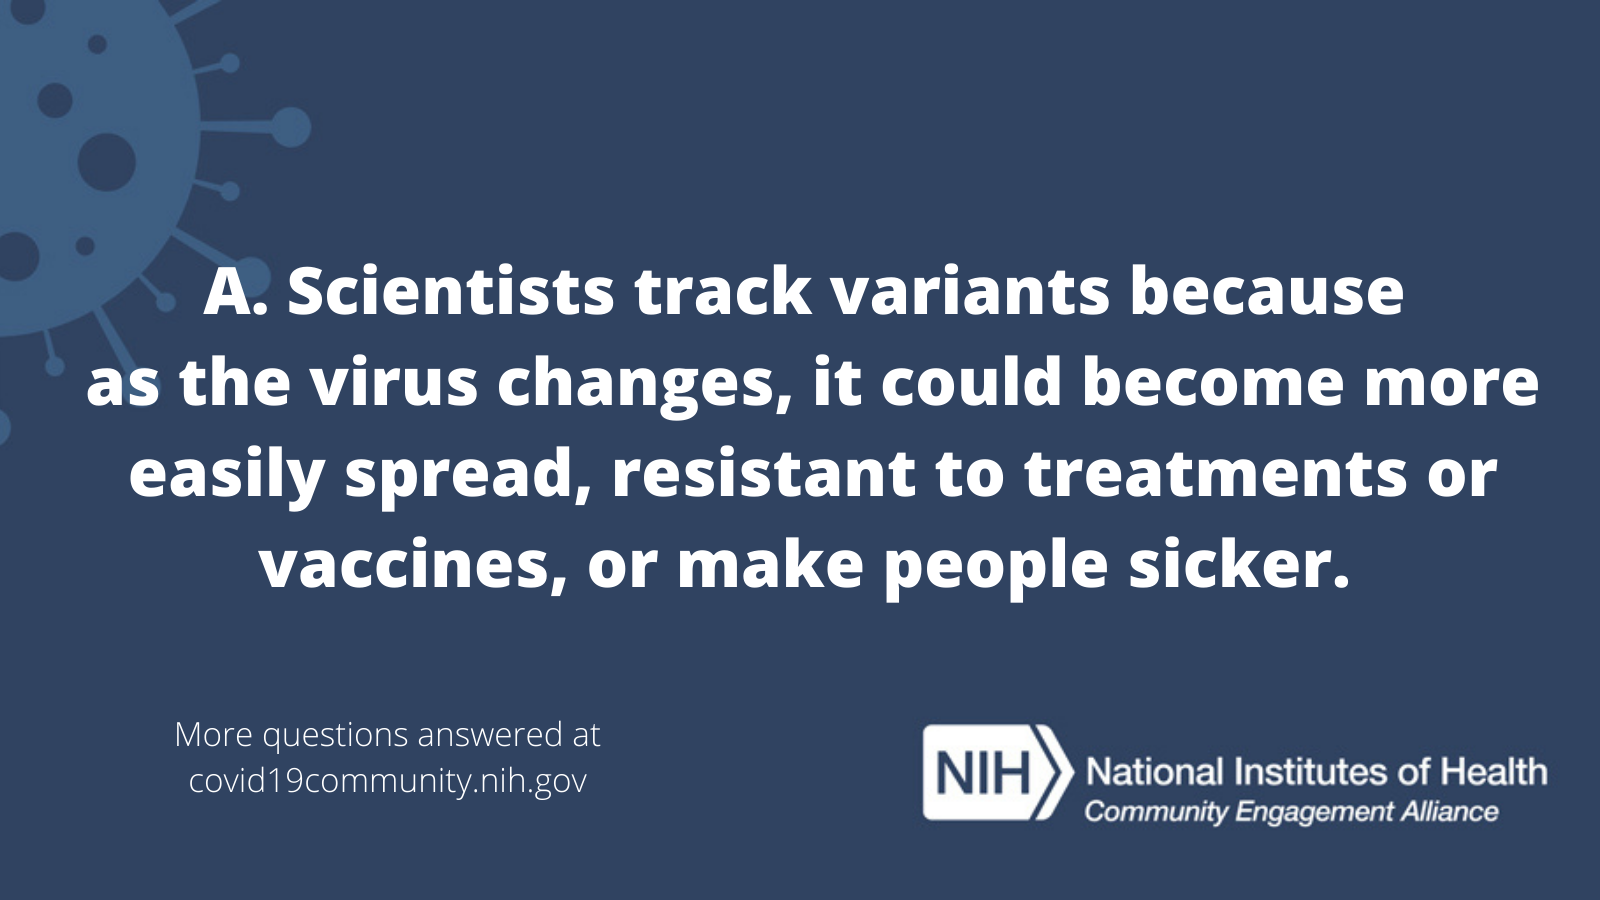 A. Scientists track variants because as the virus changes, it could become more easily spread, resistant to treatments or vaccines, or make people sicker. More vaccine questions answered at covid19community.nih.gov